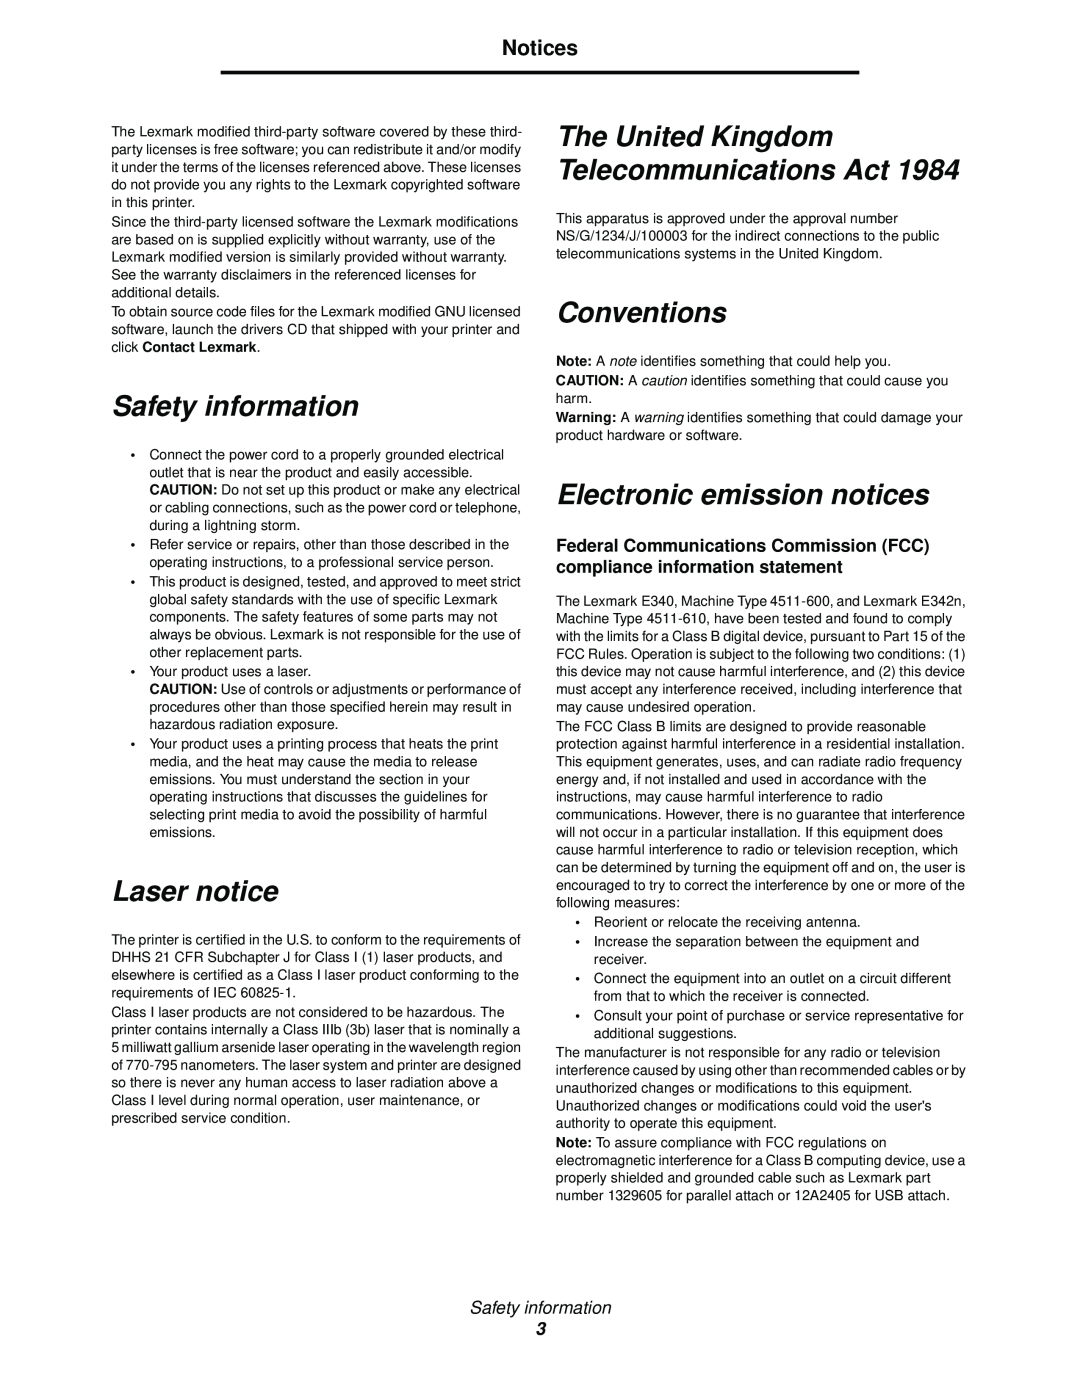 Lexmark 340, 342n manual The United Kingdom Telecommunications Act, Conventions, Safety information, Laser notice, Notices 